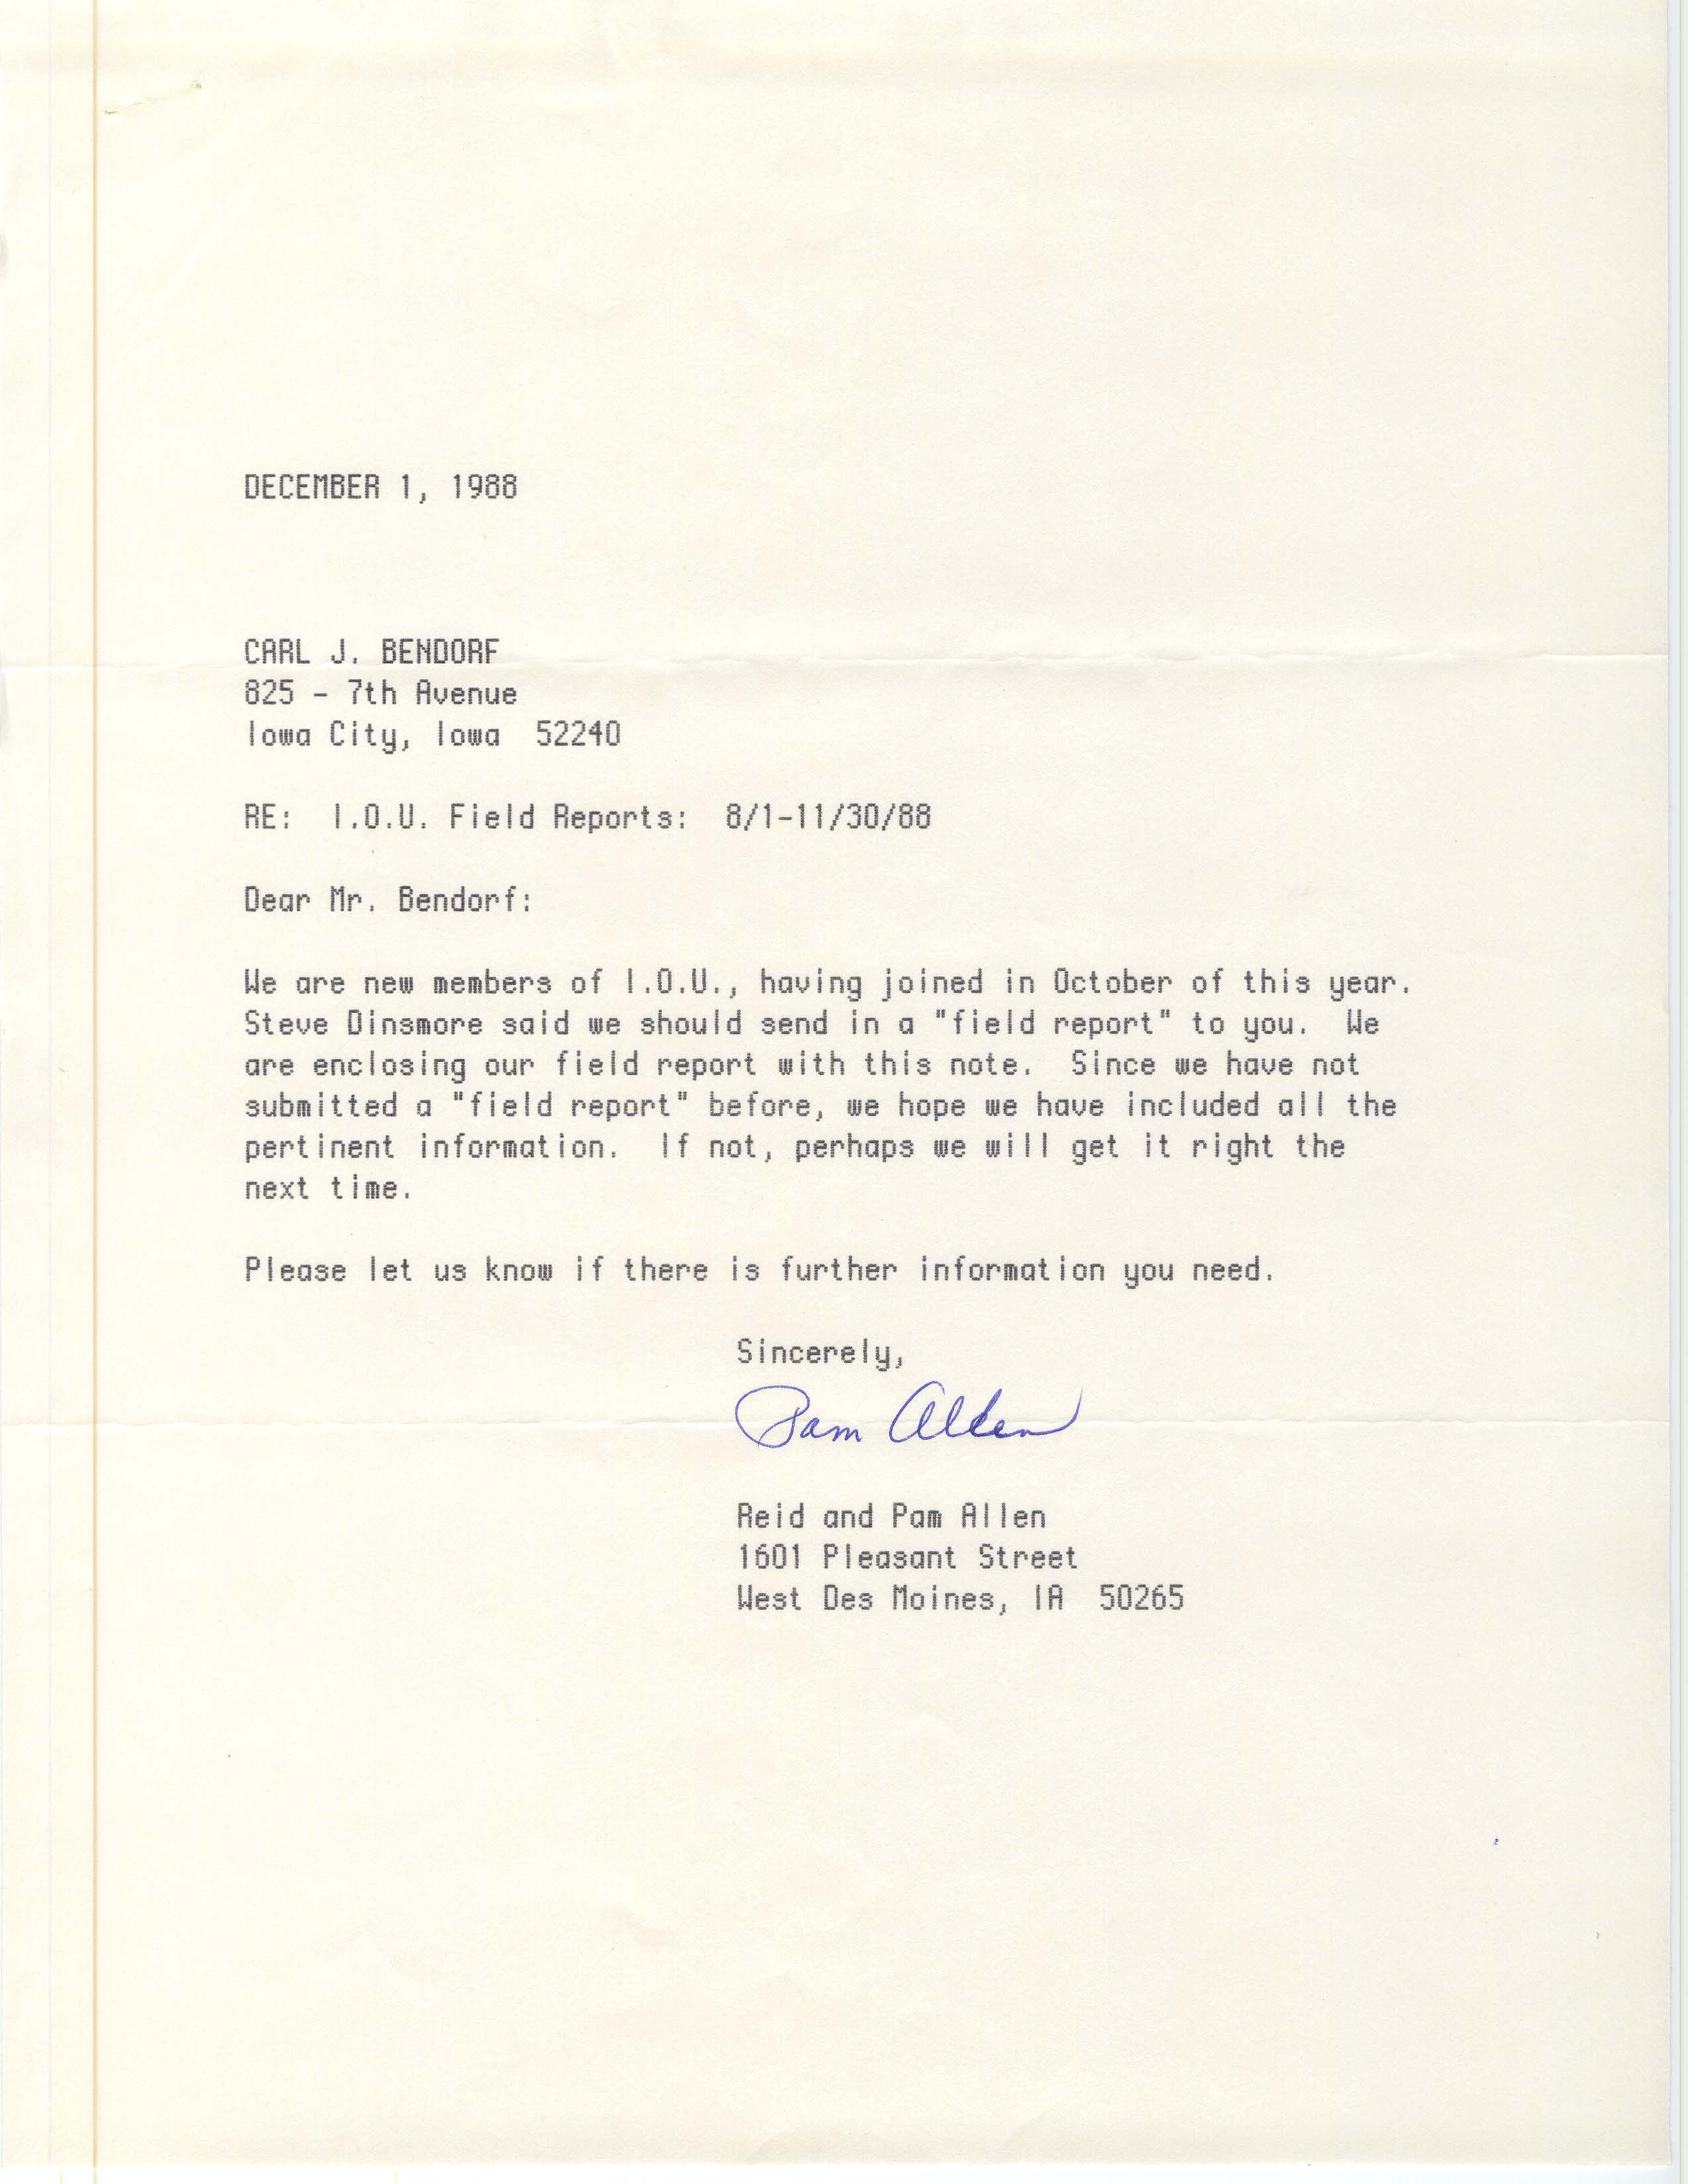 Field notes and Pam Allen and Reid I. Allen letter to Carl J. Bendorf, December 1, 1988